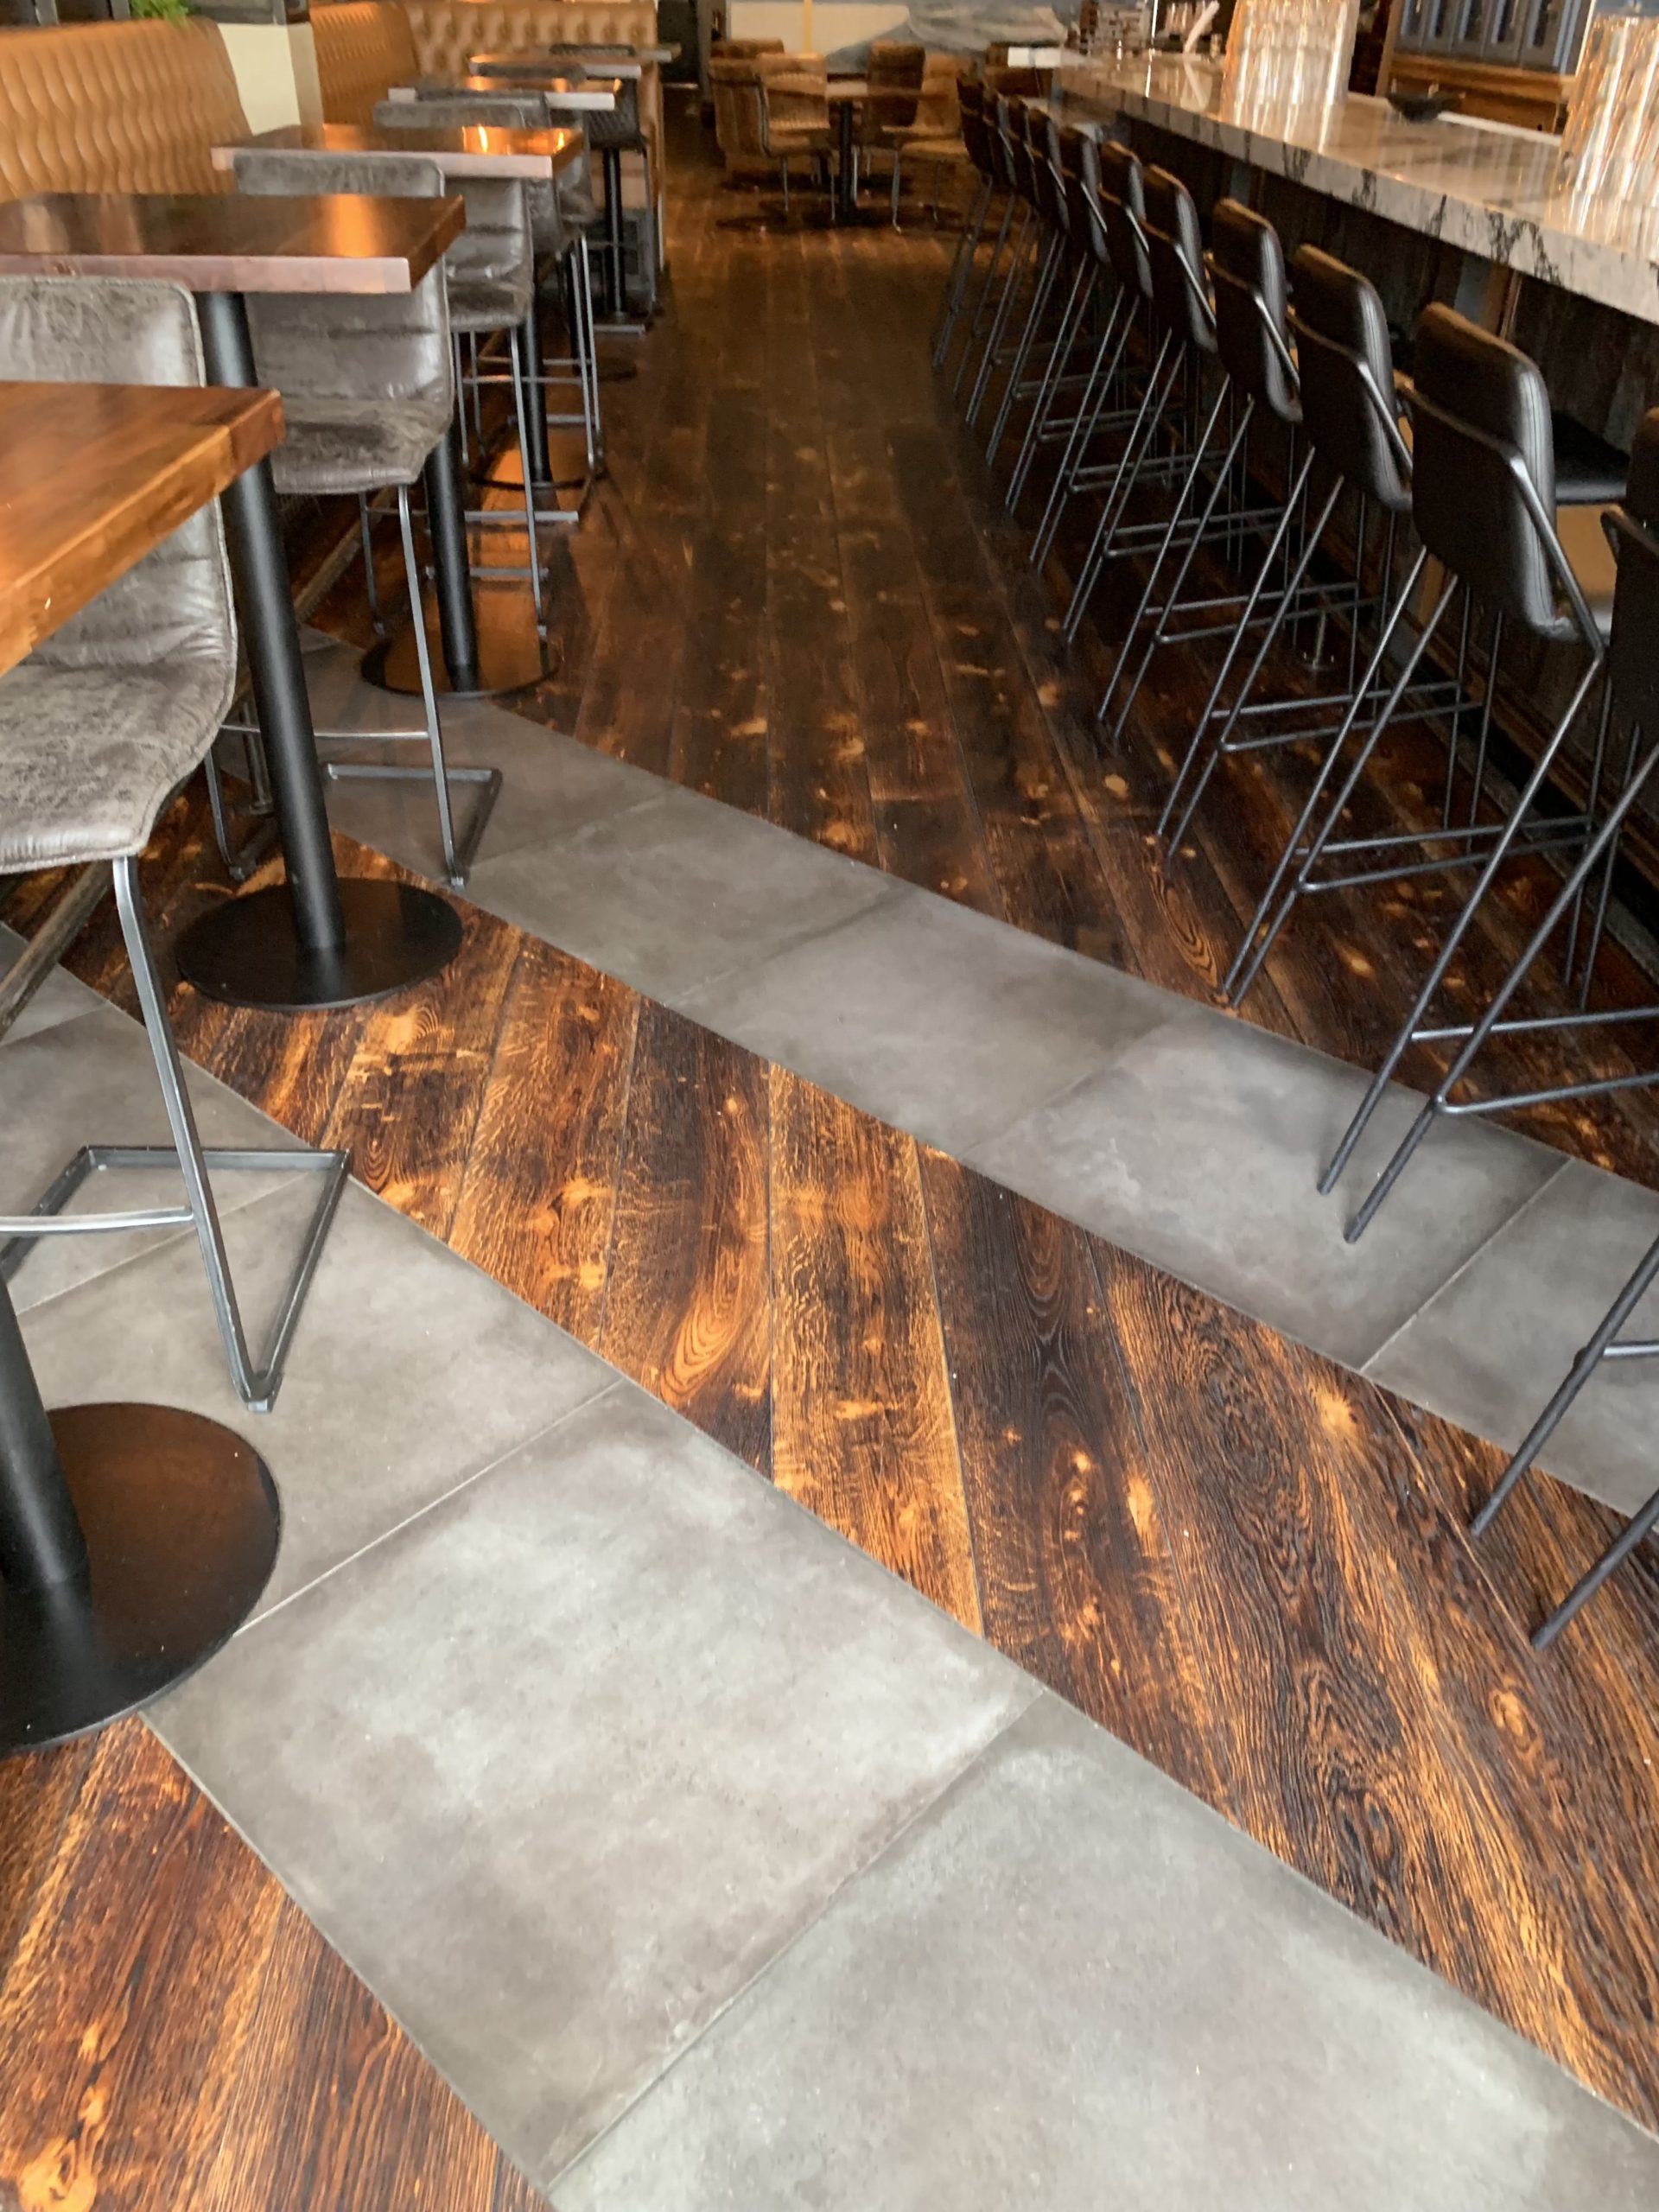 The top Austin commercial Hardwood Flooring Services is Austin Flooring Company